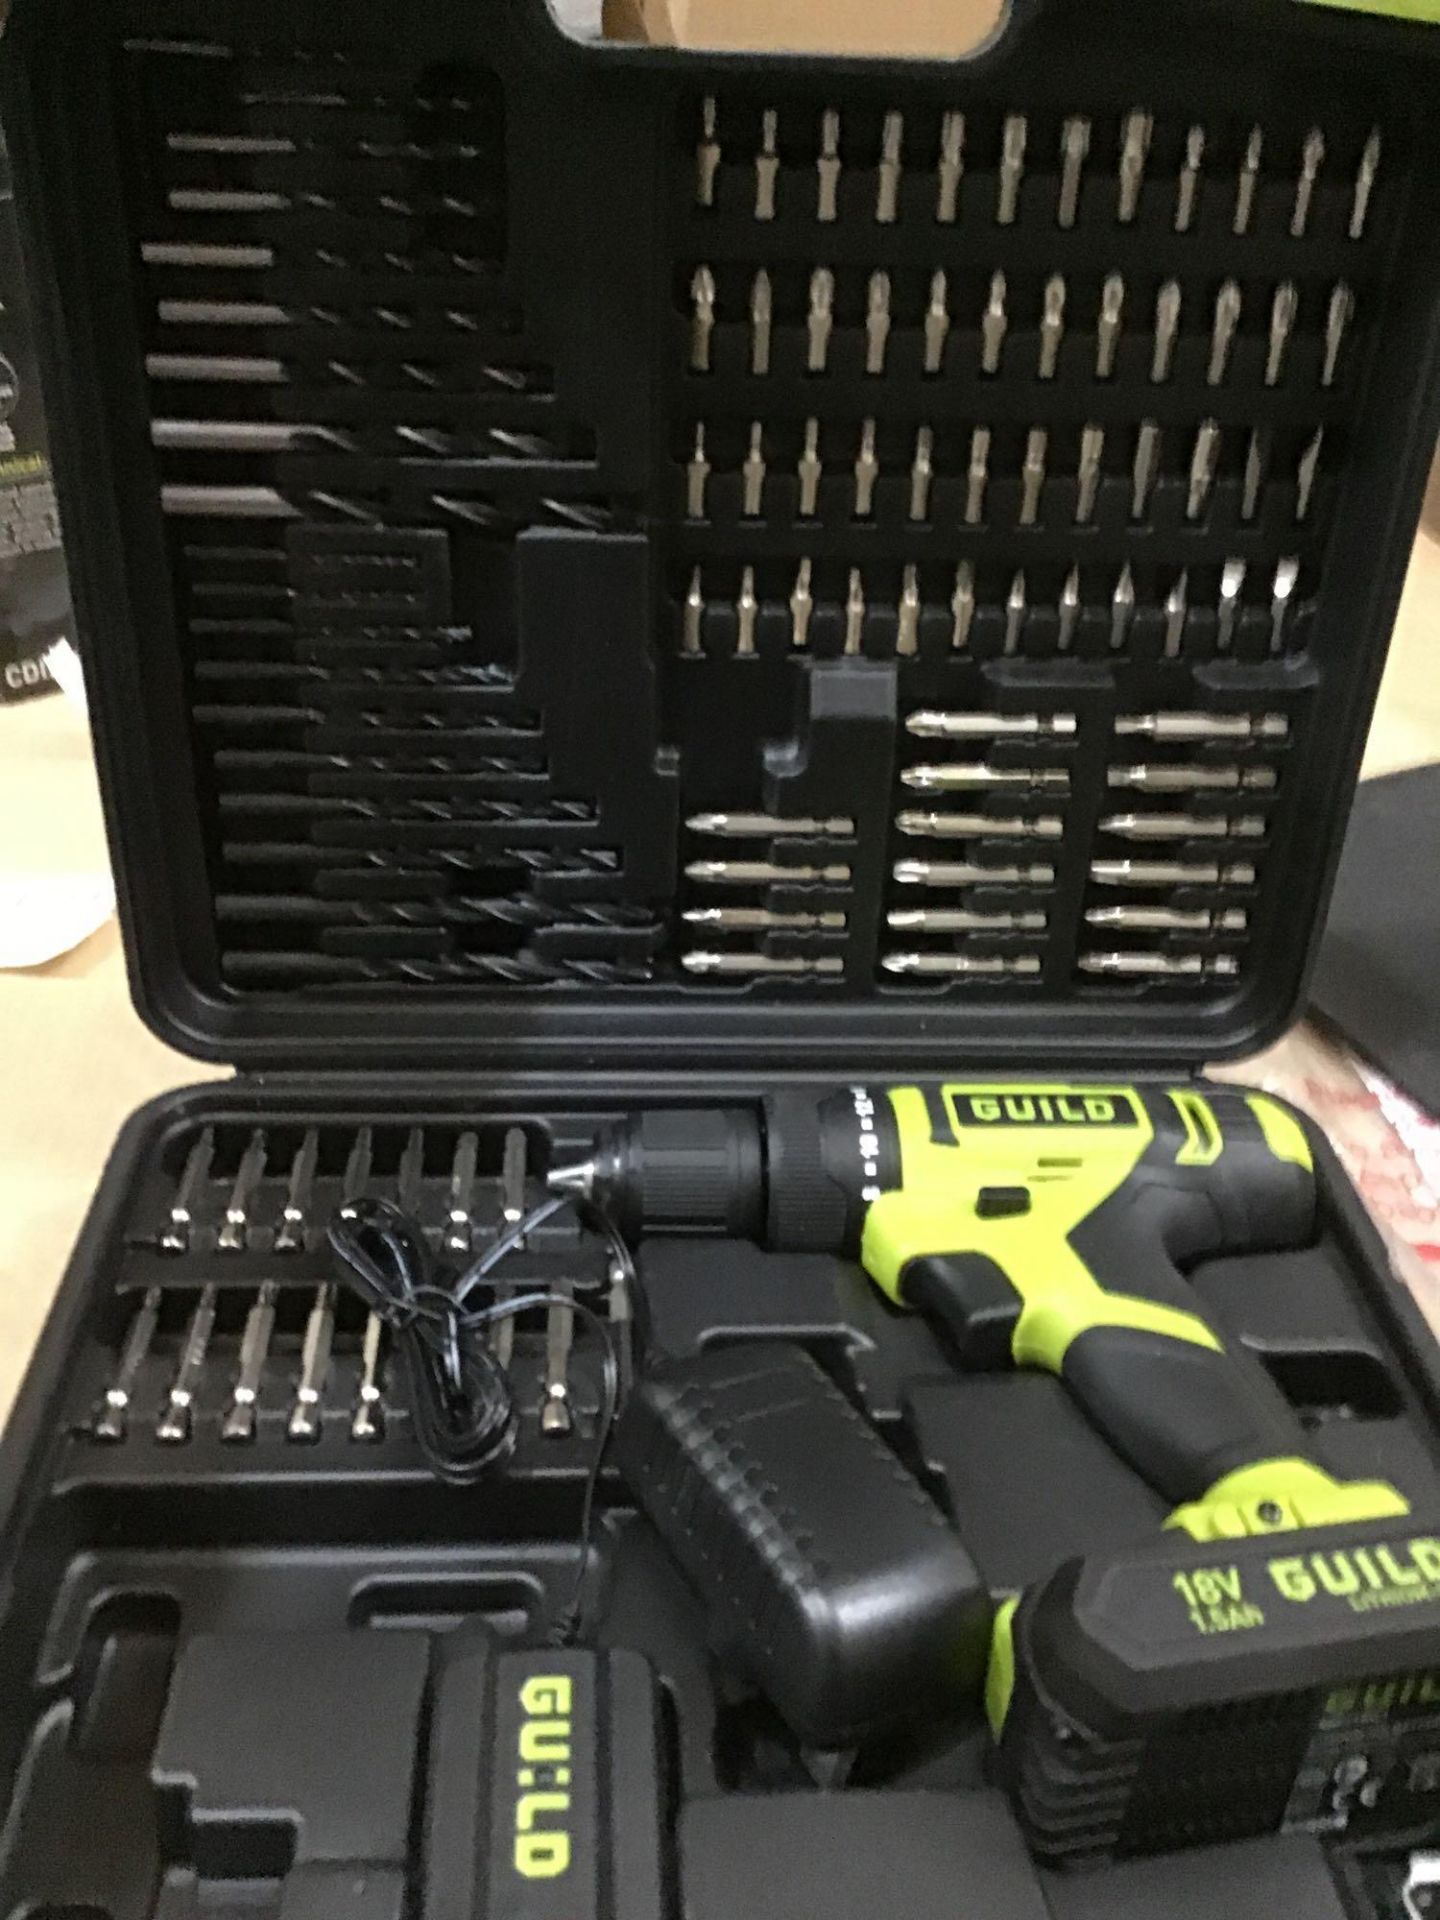 Guild 1.5Ah Cordless Combi Drill with 100 Accessories - 18V, £50.00 RRP - Image 2 of 5